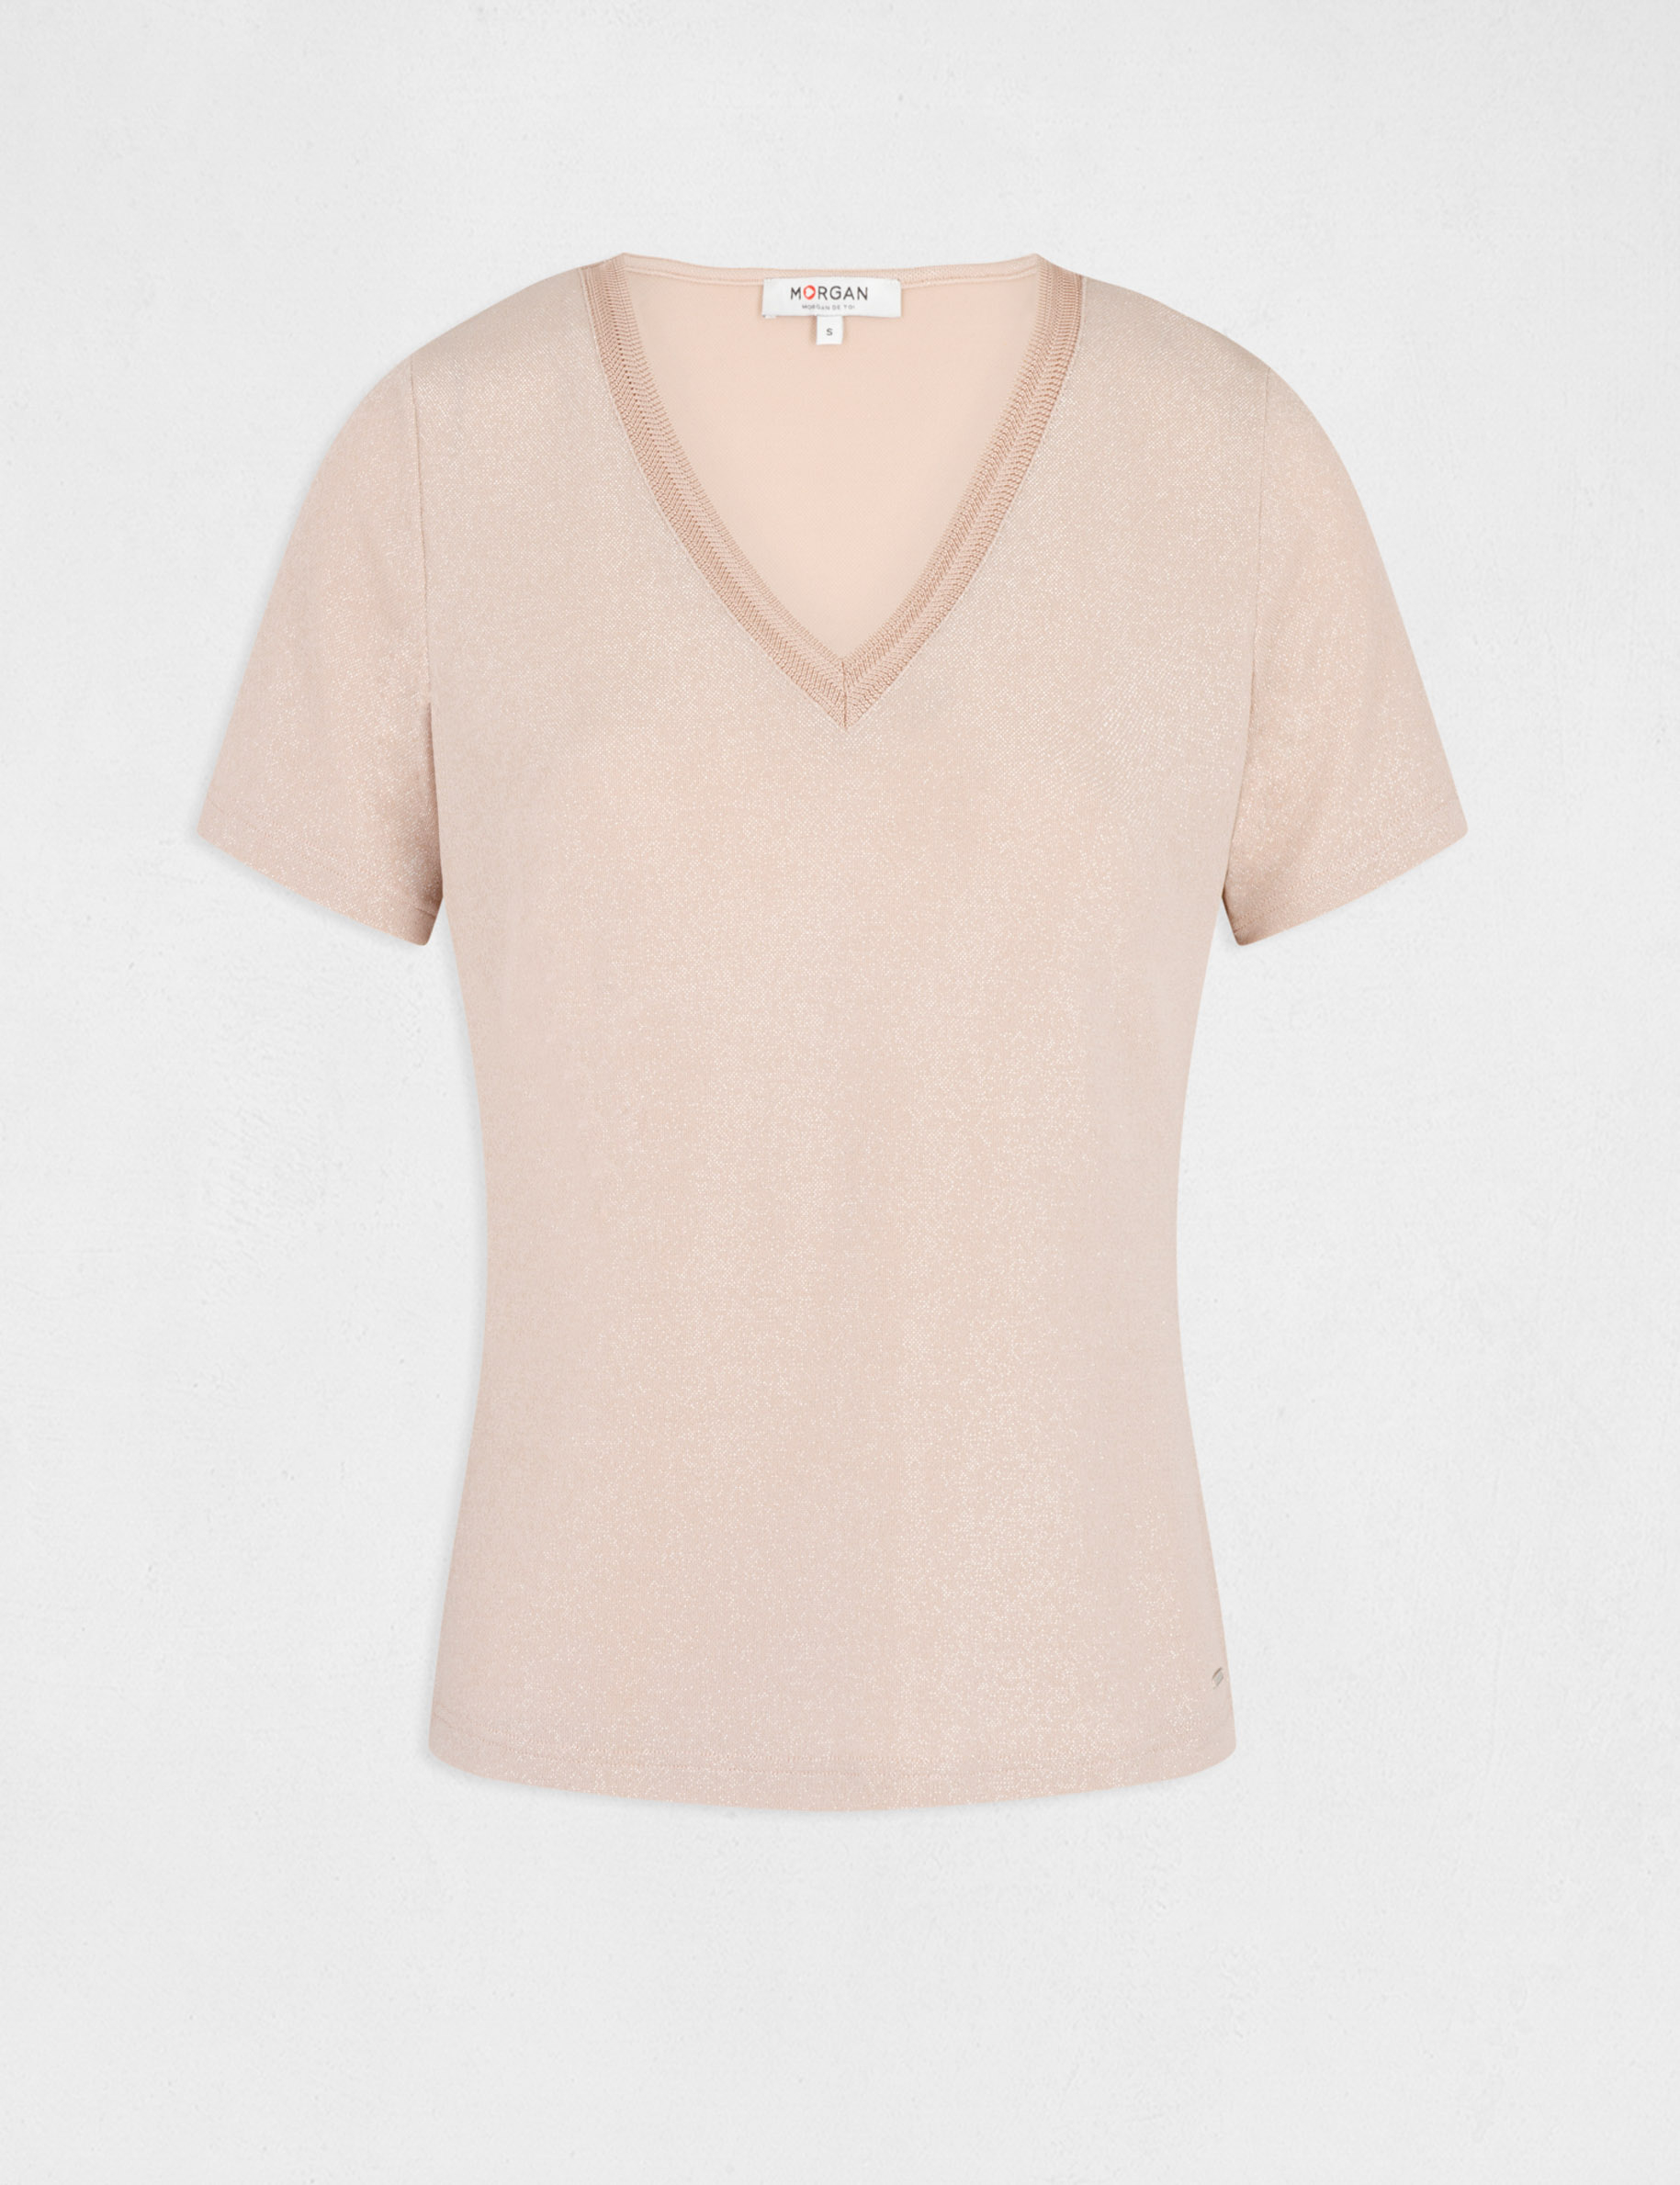 Short-sleeved t-shirt with V-neck pink ladies'